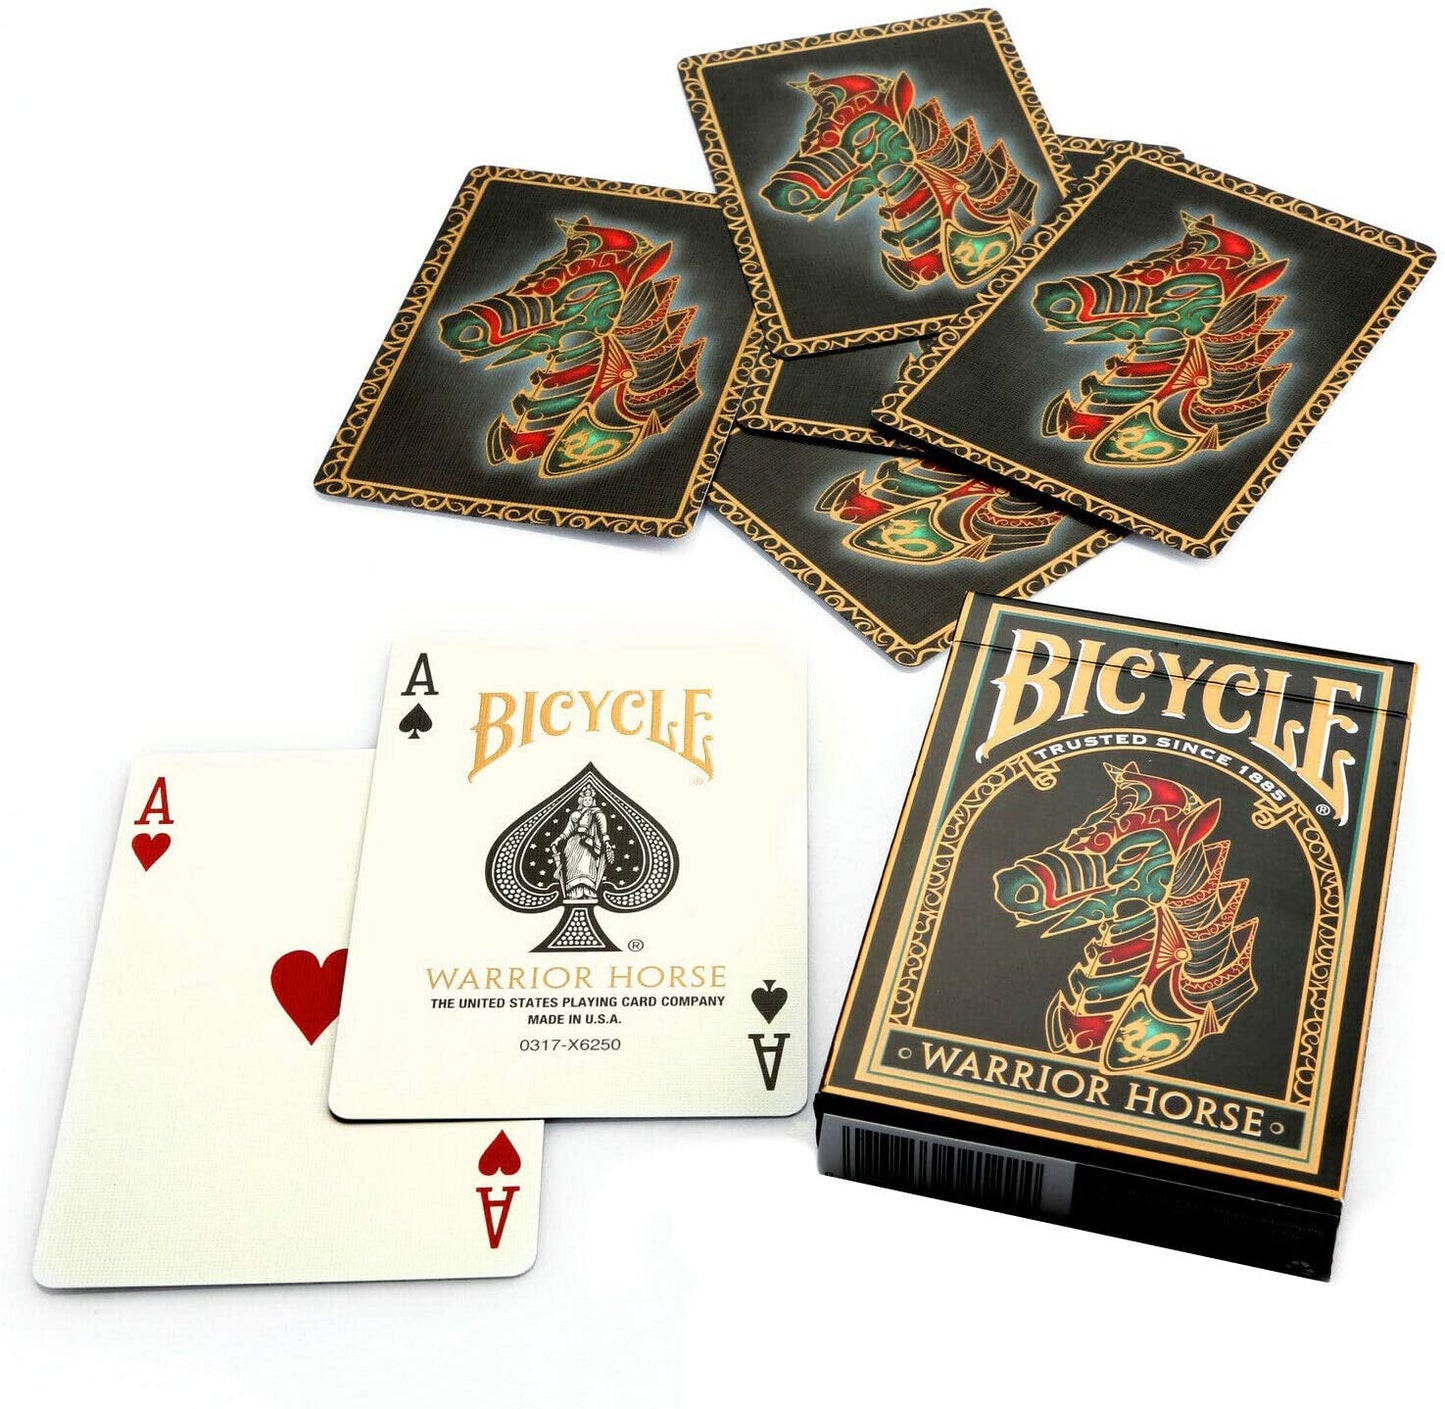 Cartes Bicycle® - Édition Cheval Guerrier